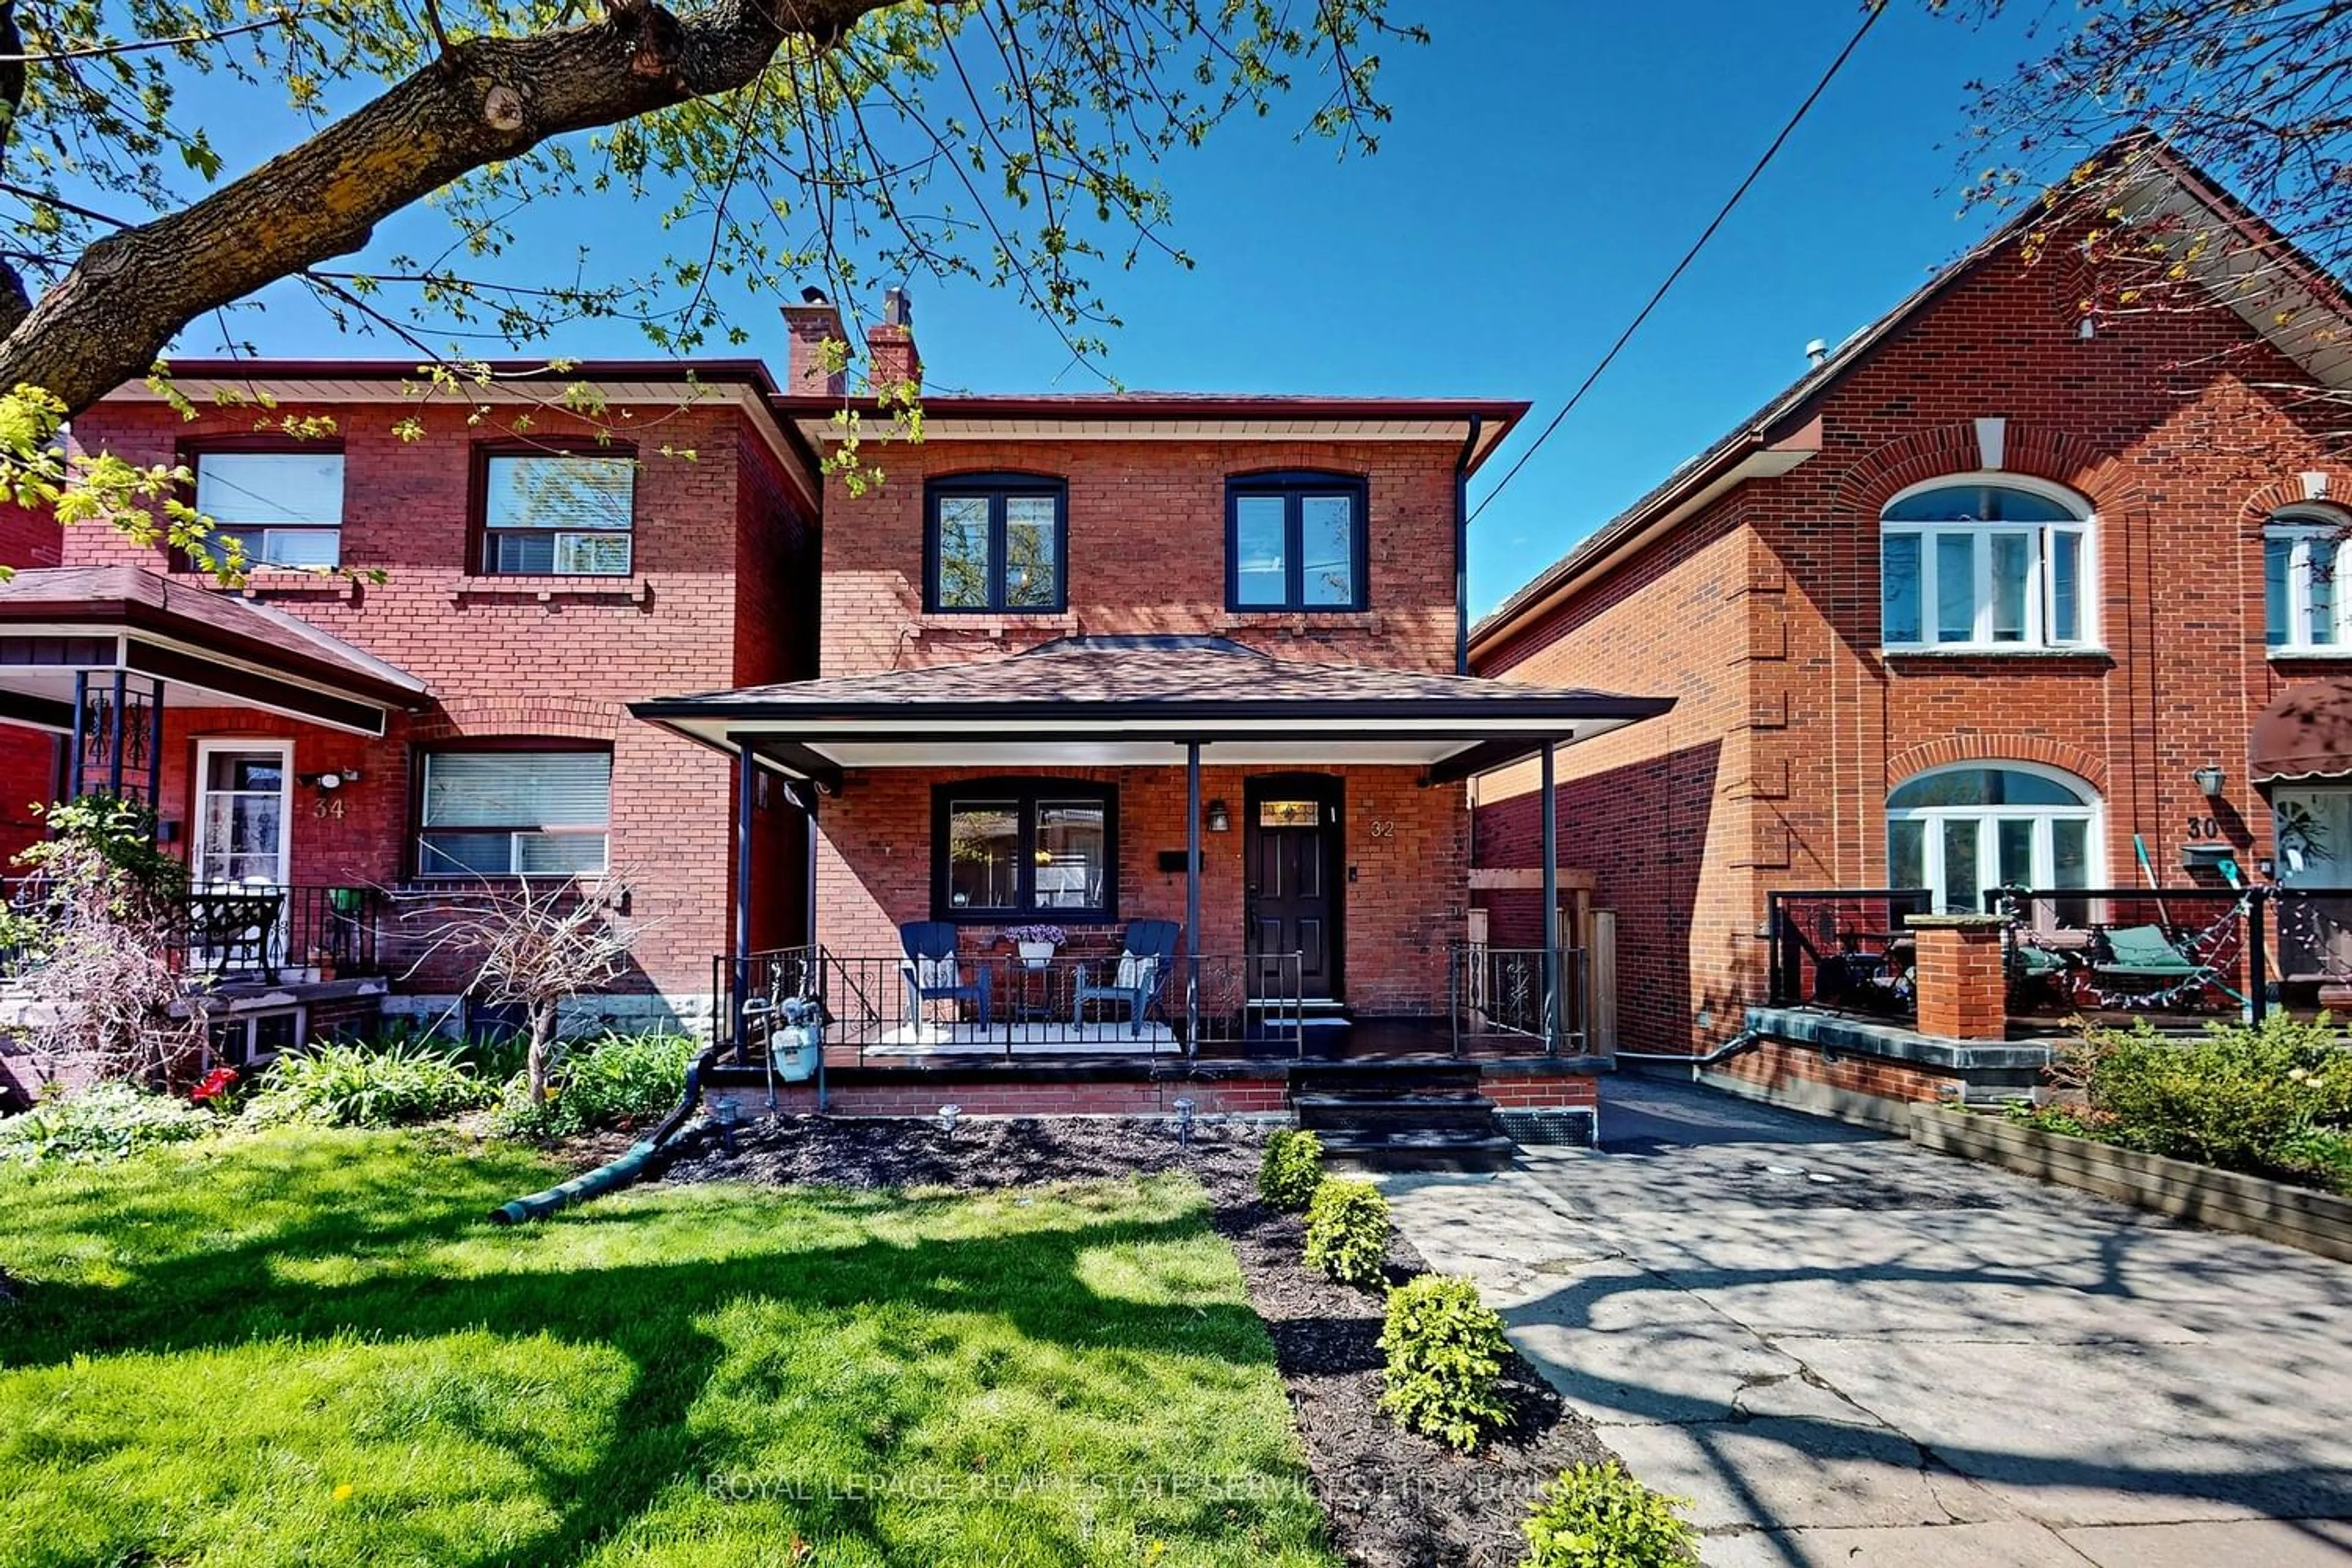 Home with brick exterior material for 32 Belvidere Ave, Toronto Ontario M6C 1P6